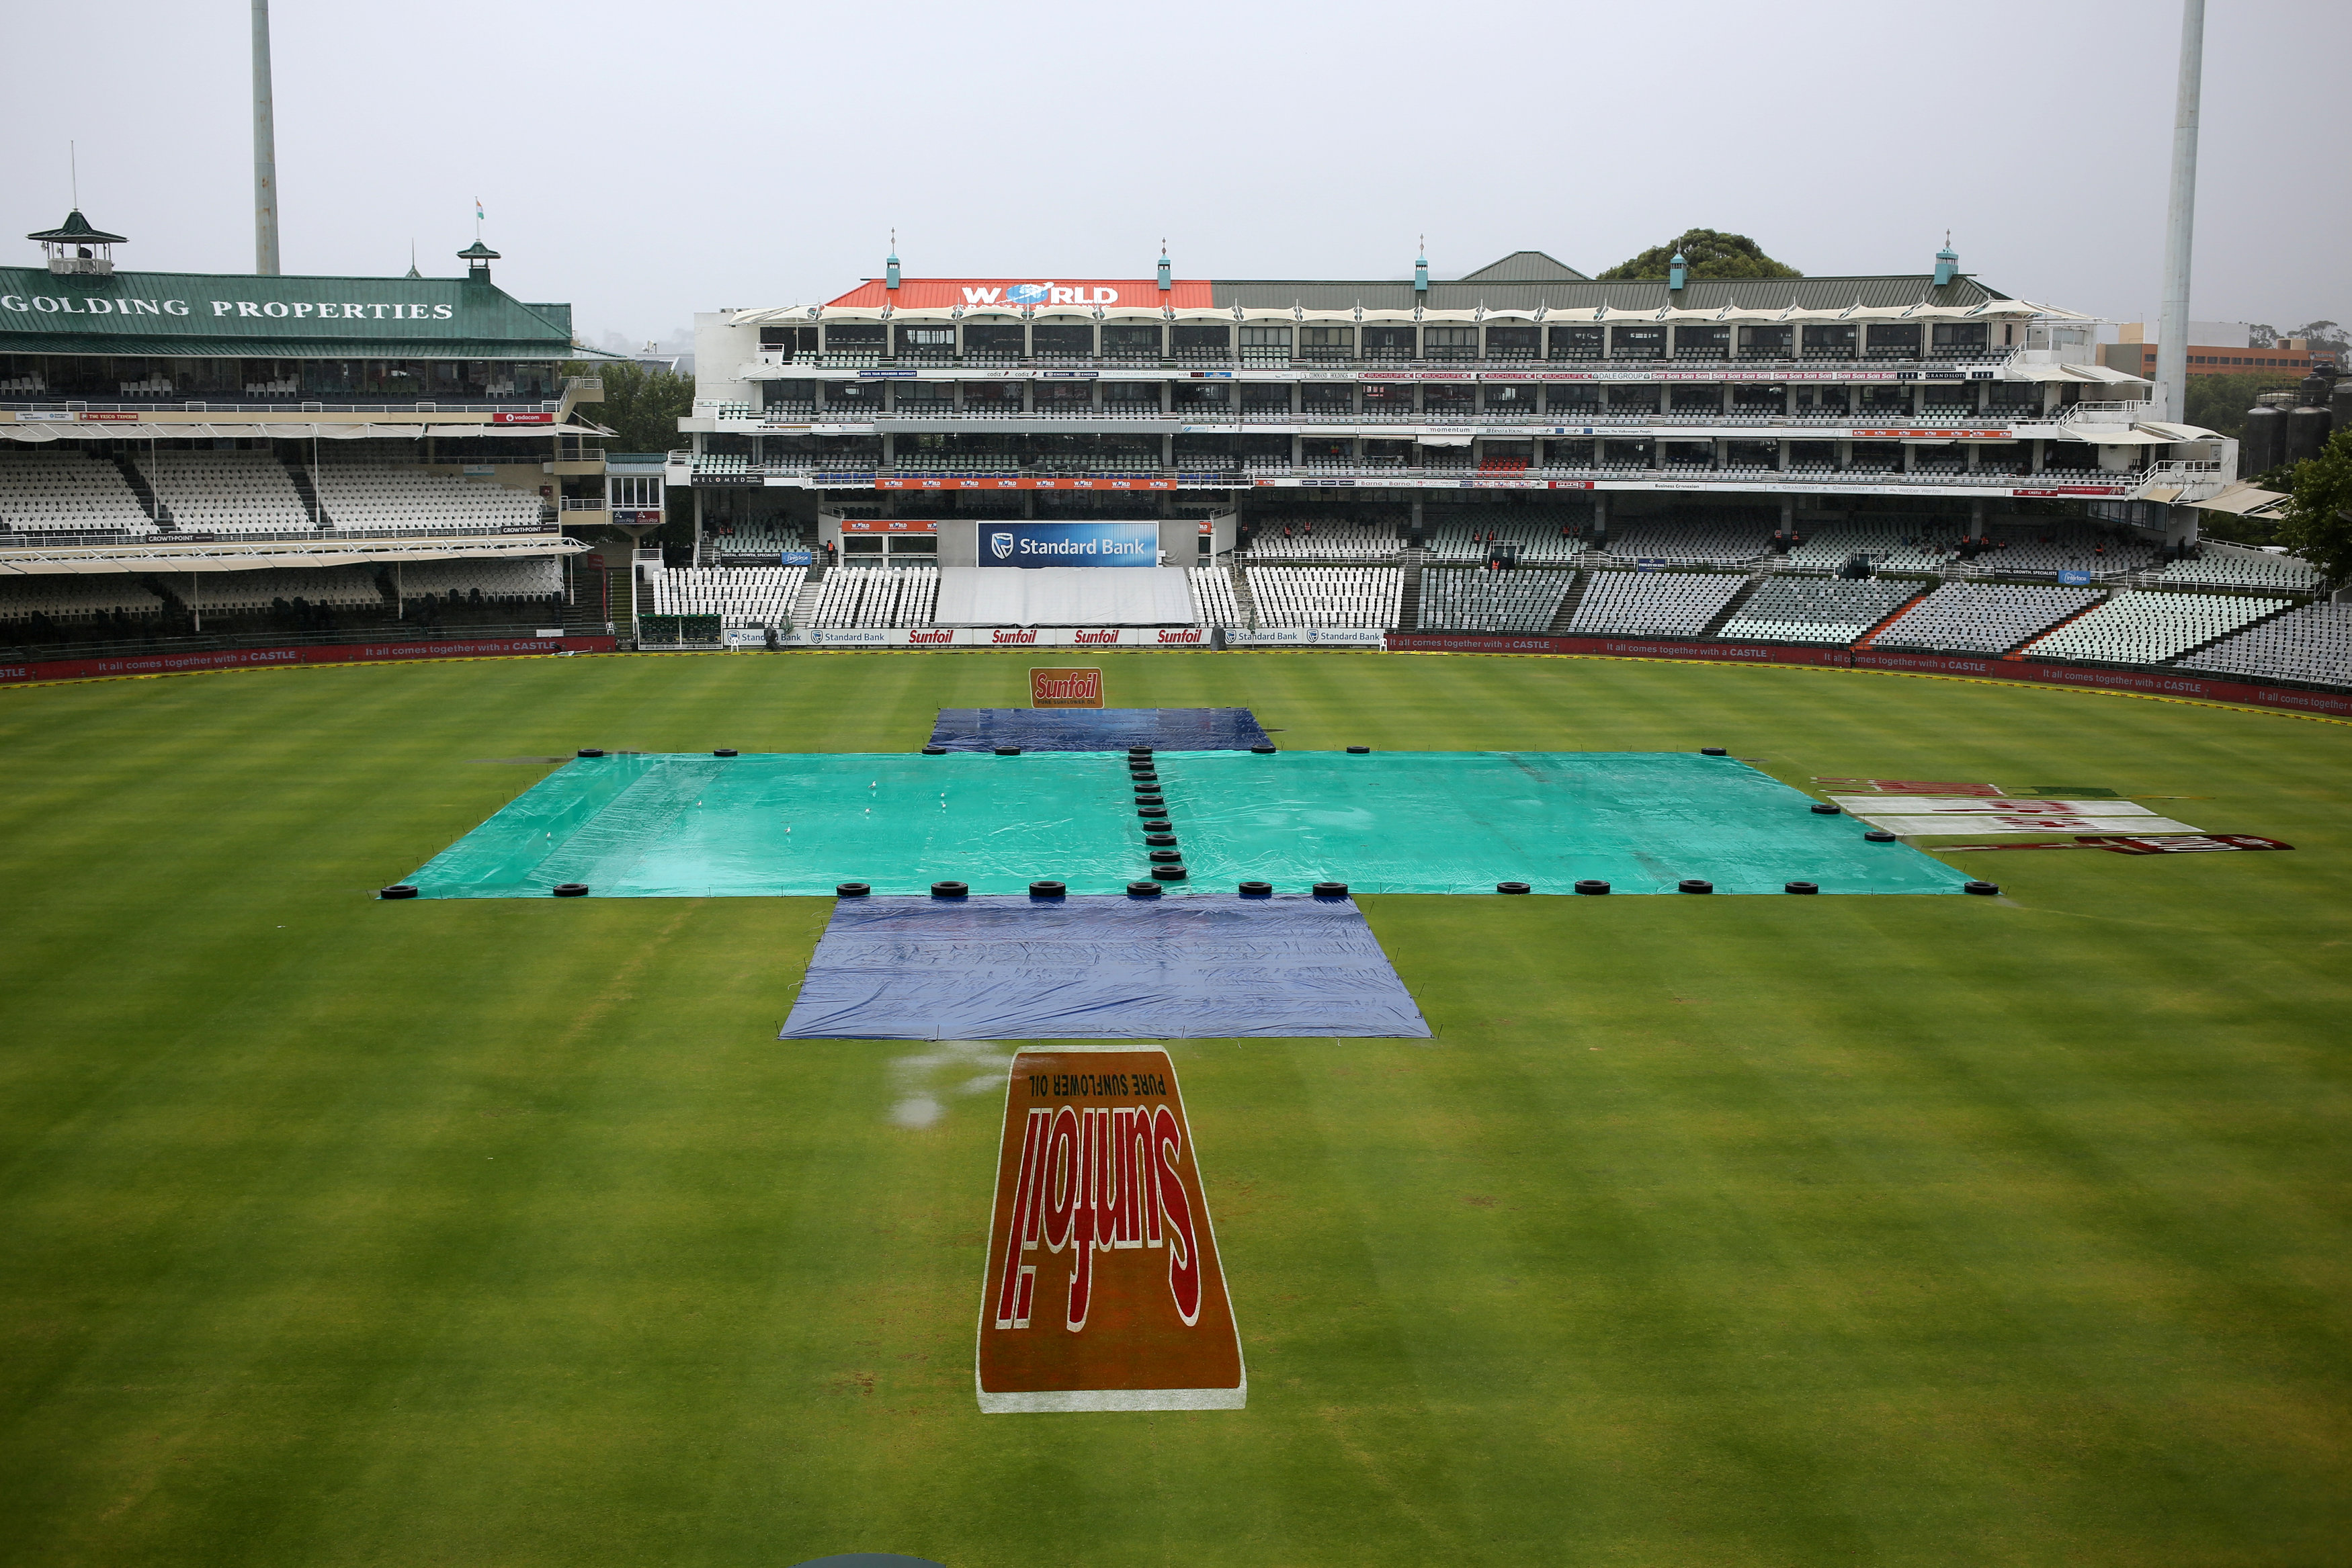 Cricket: Third day of India-South Africa Test washed out